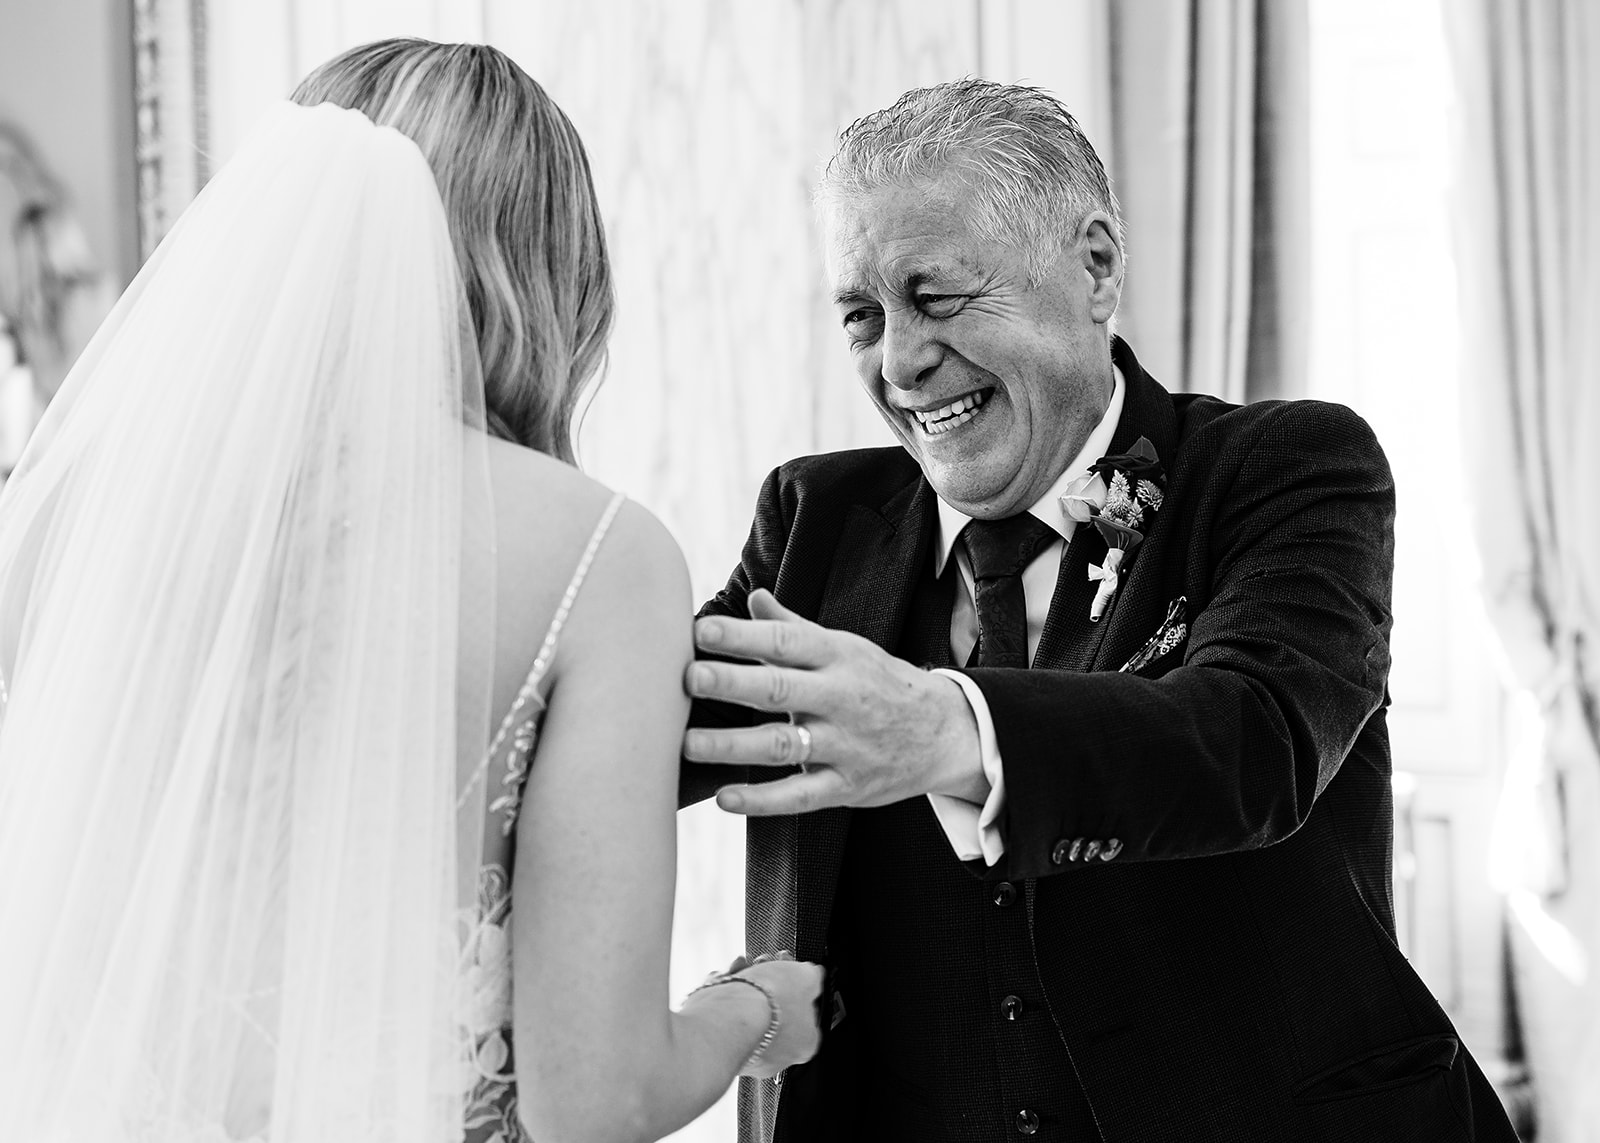 An emotional moment as the father of the bride reaches out to hug his daughter